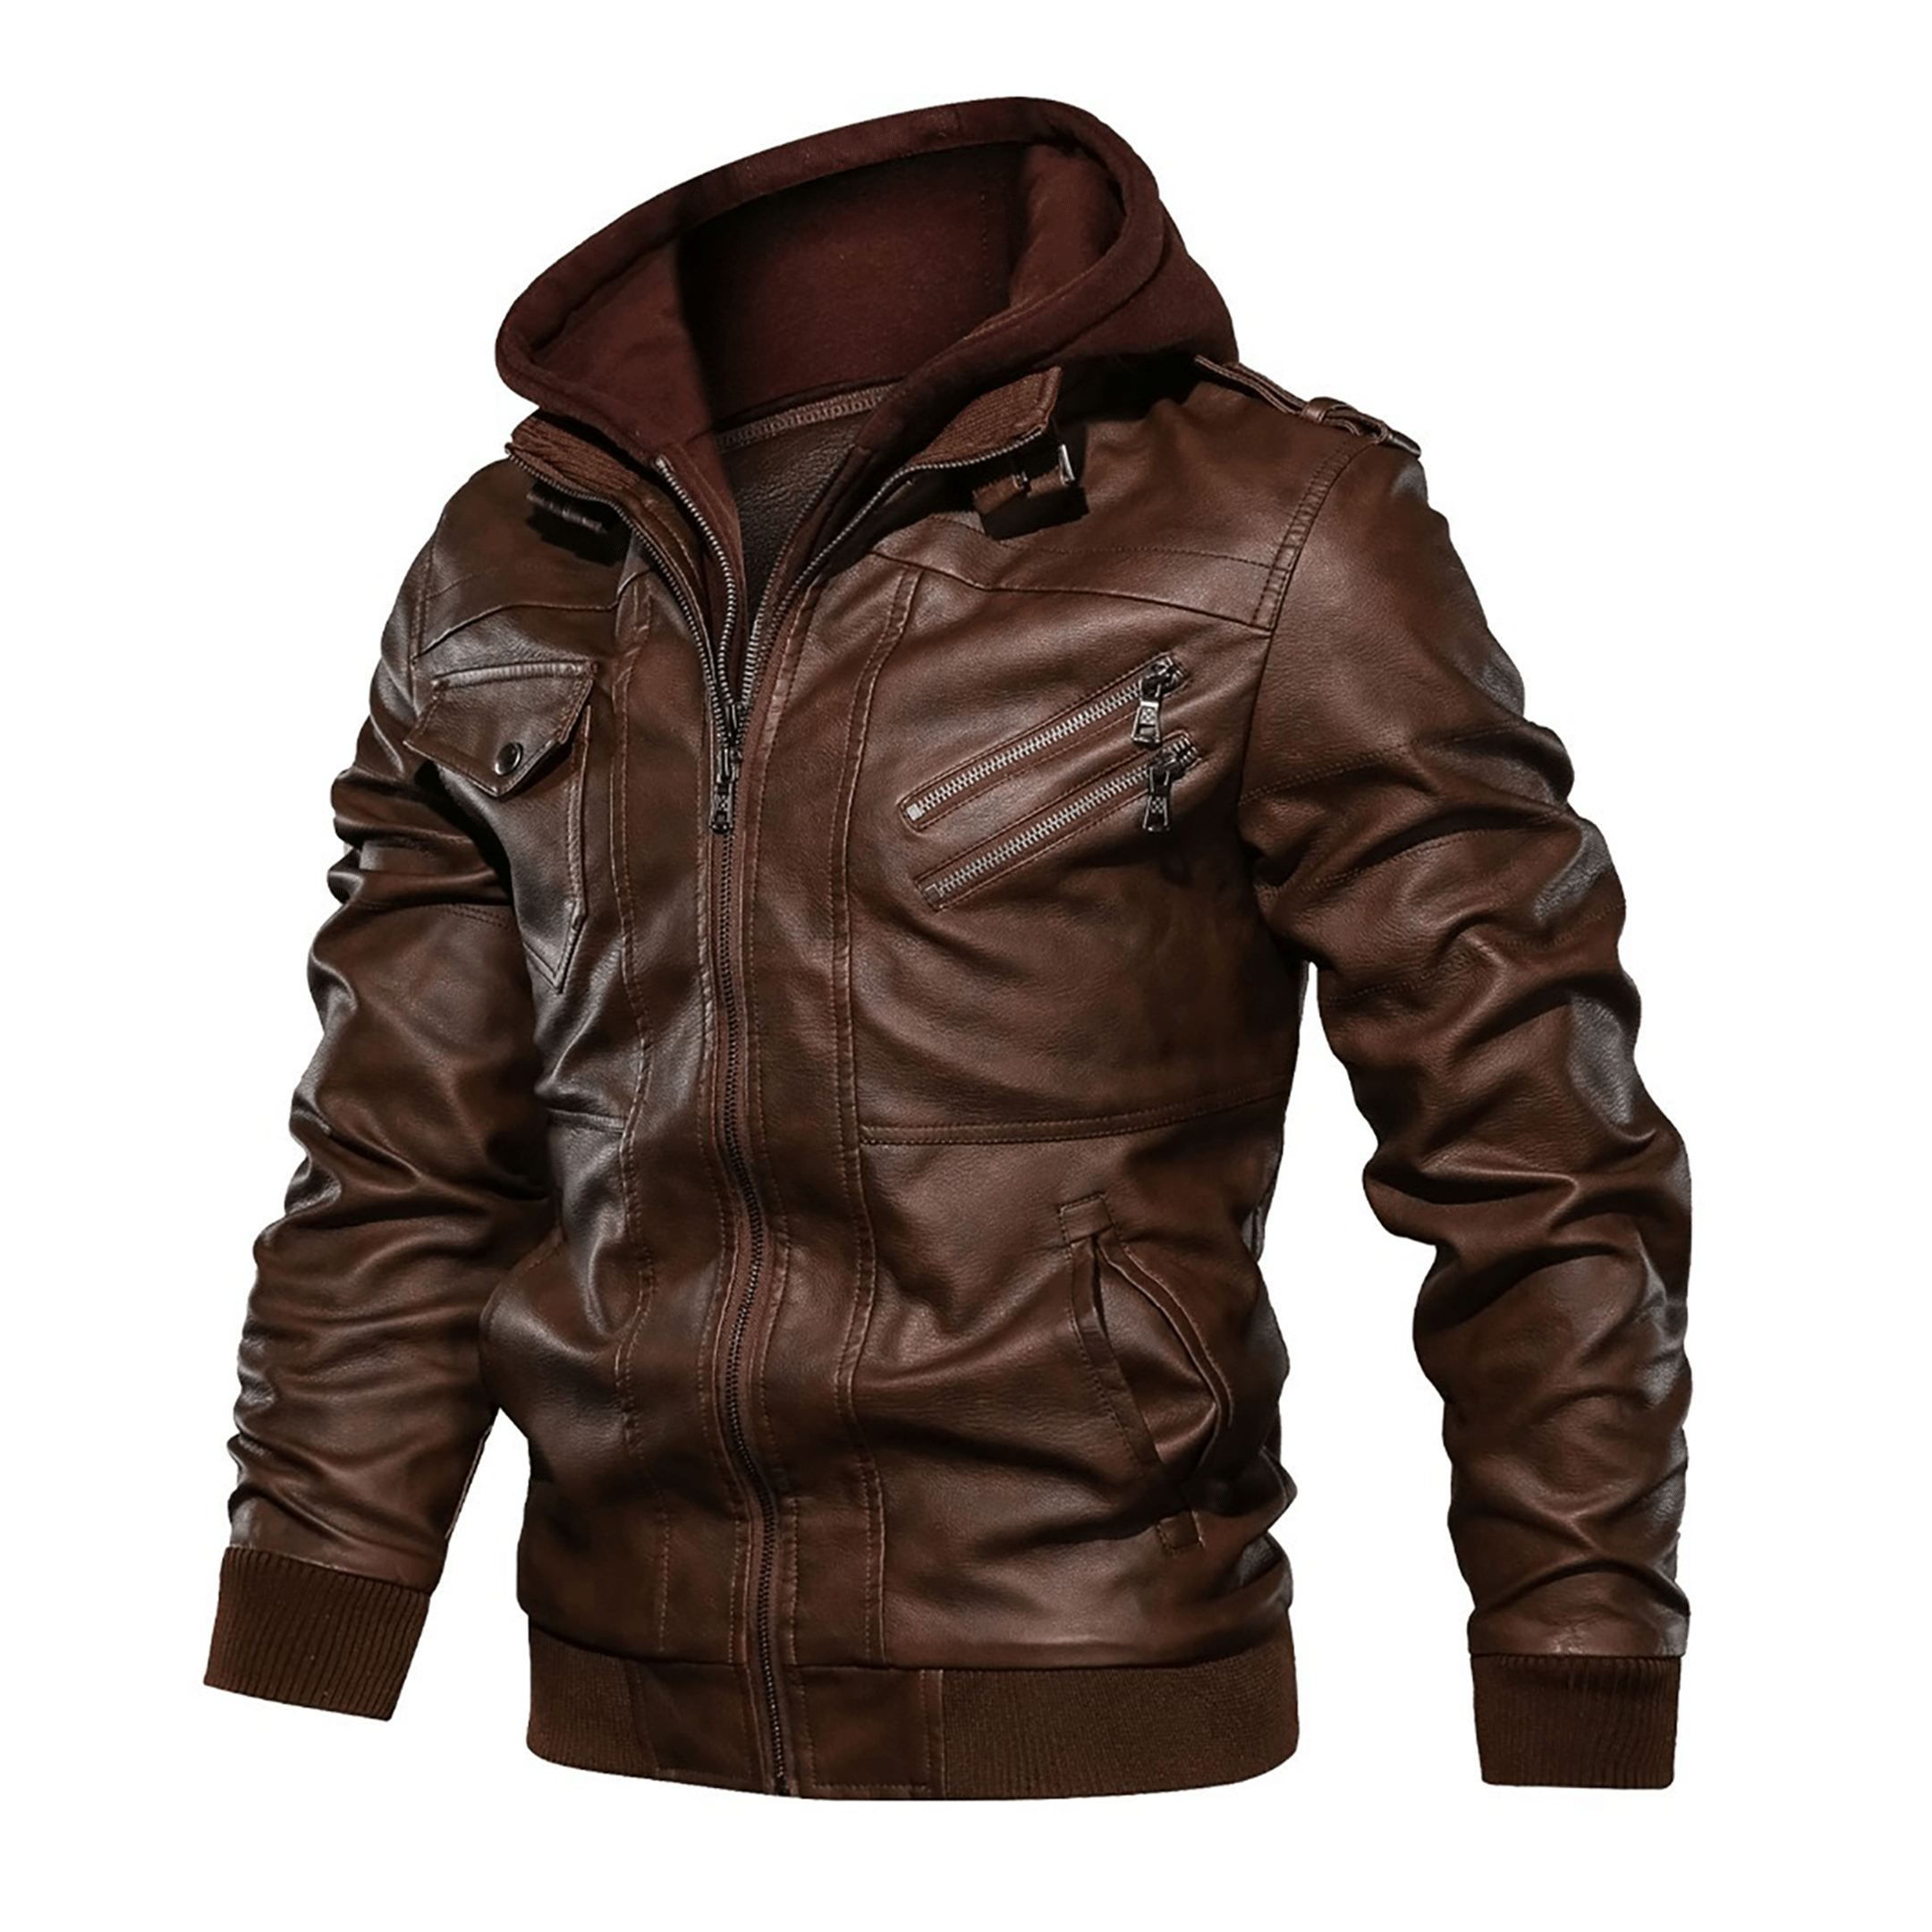 Top leather jackets and latest products 357